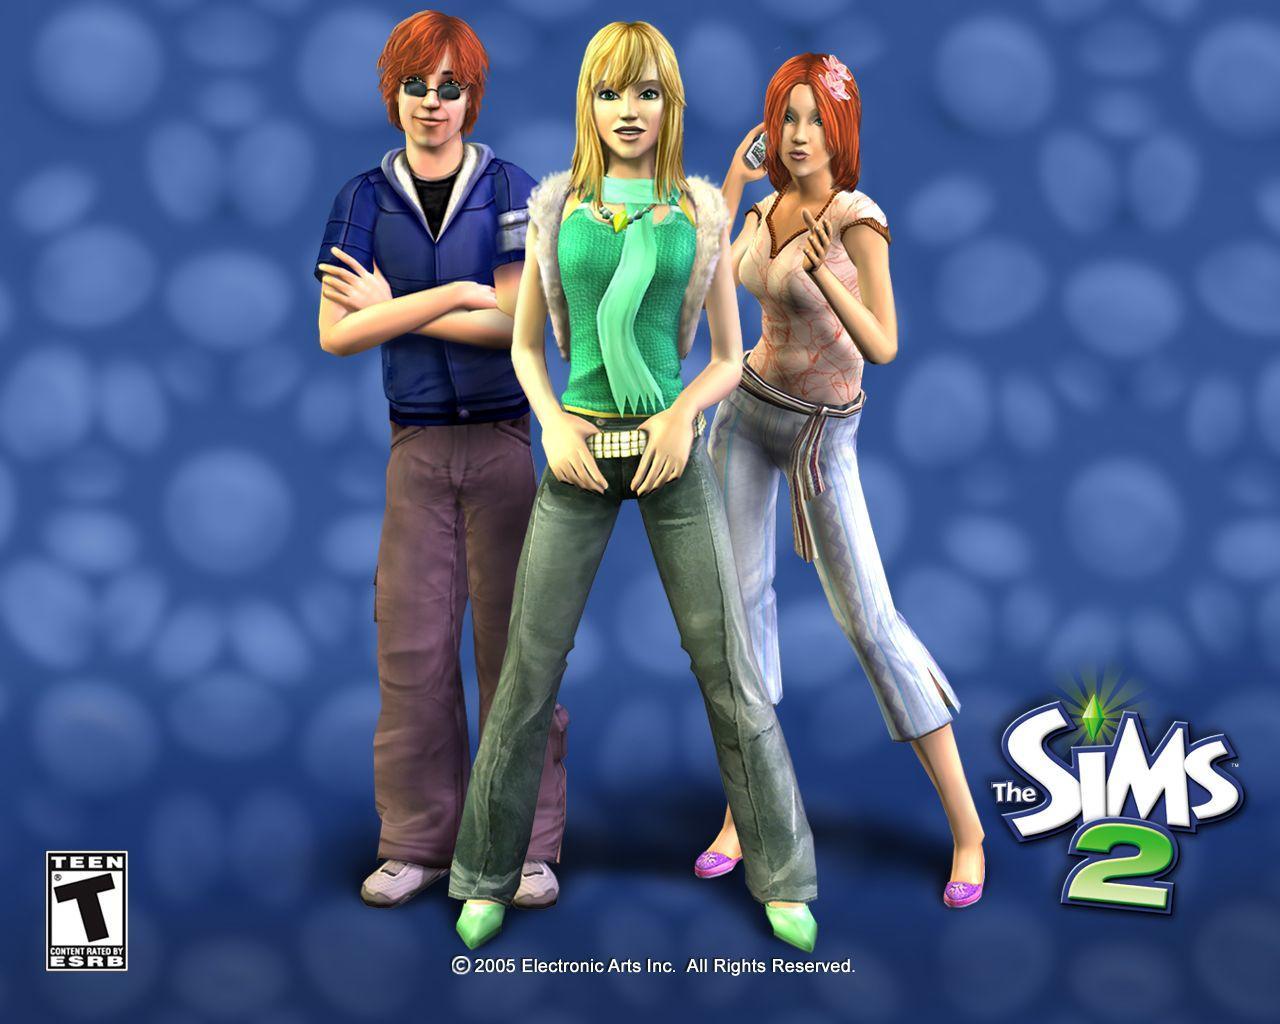 The Sims free Wallpapers